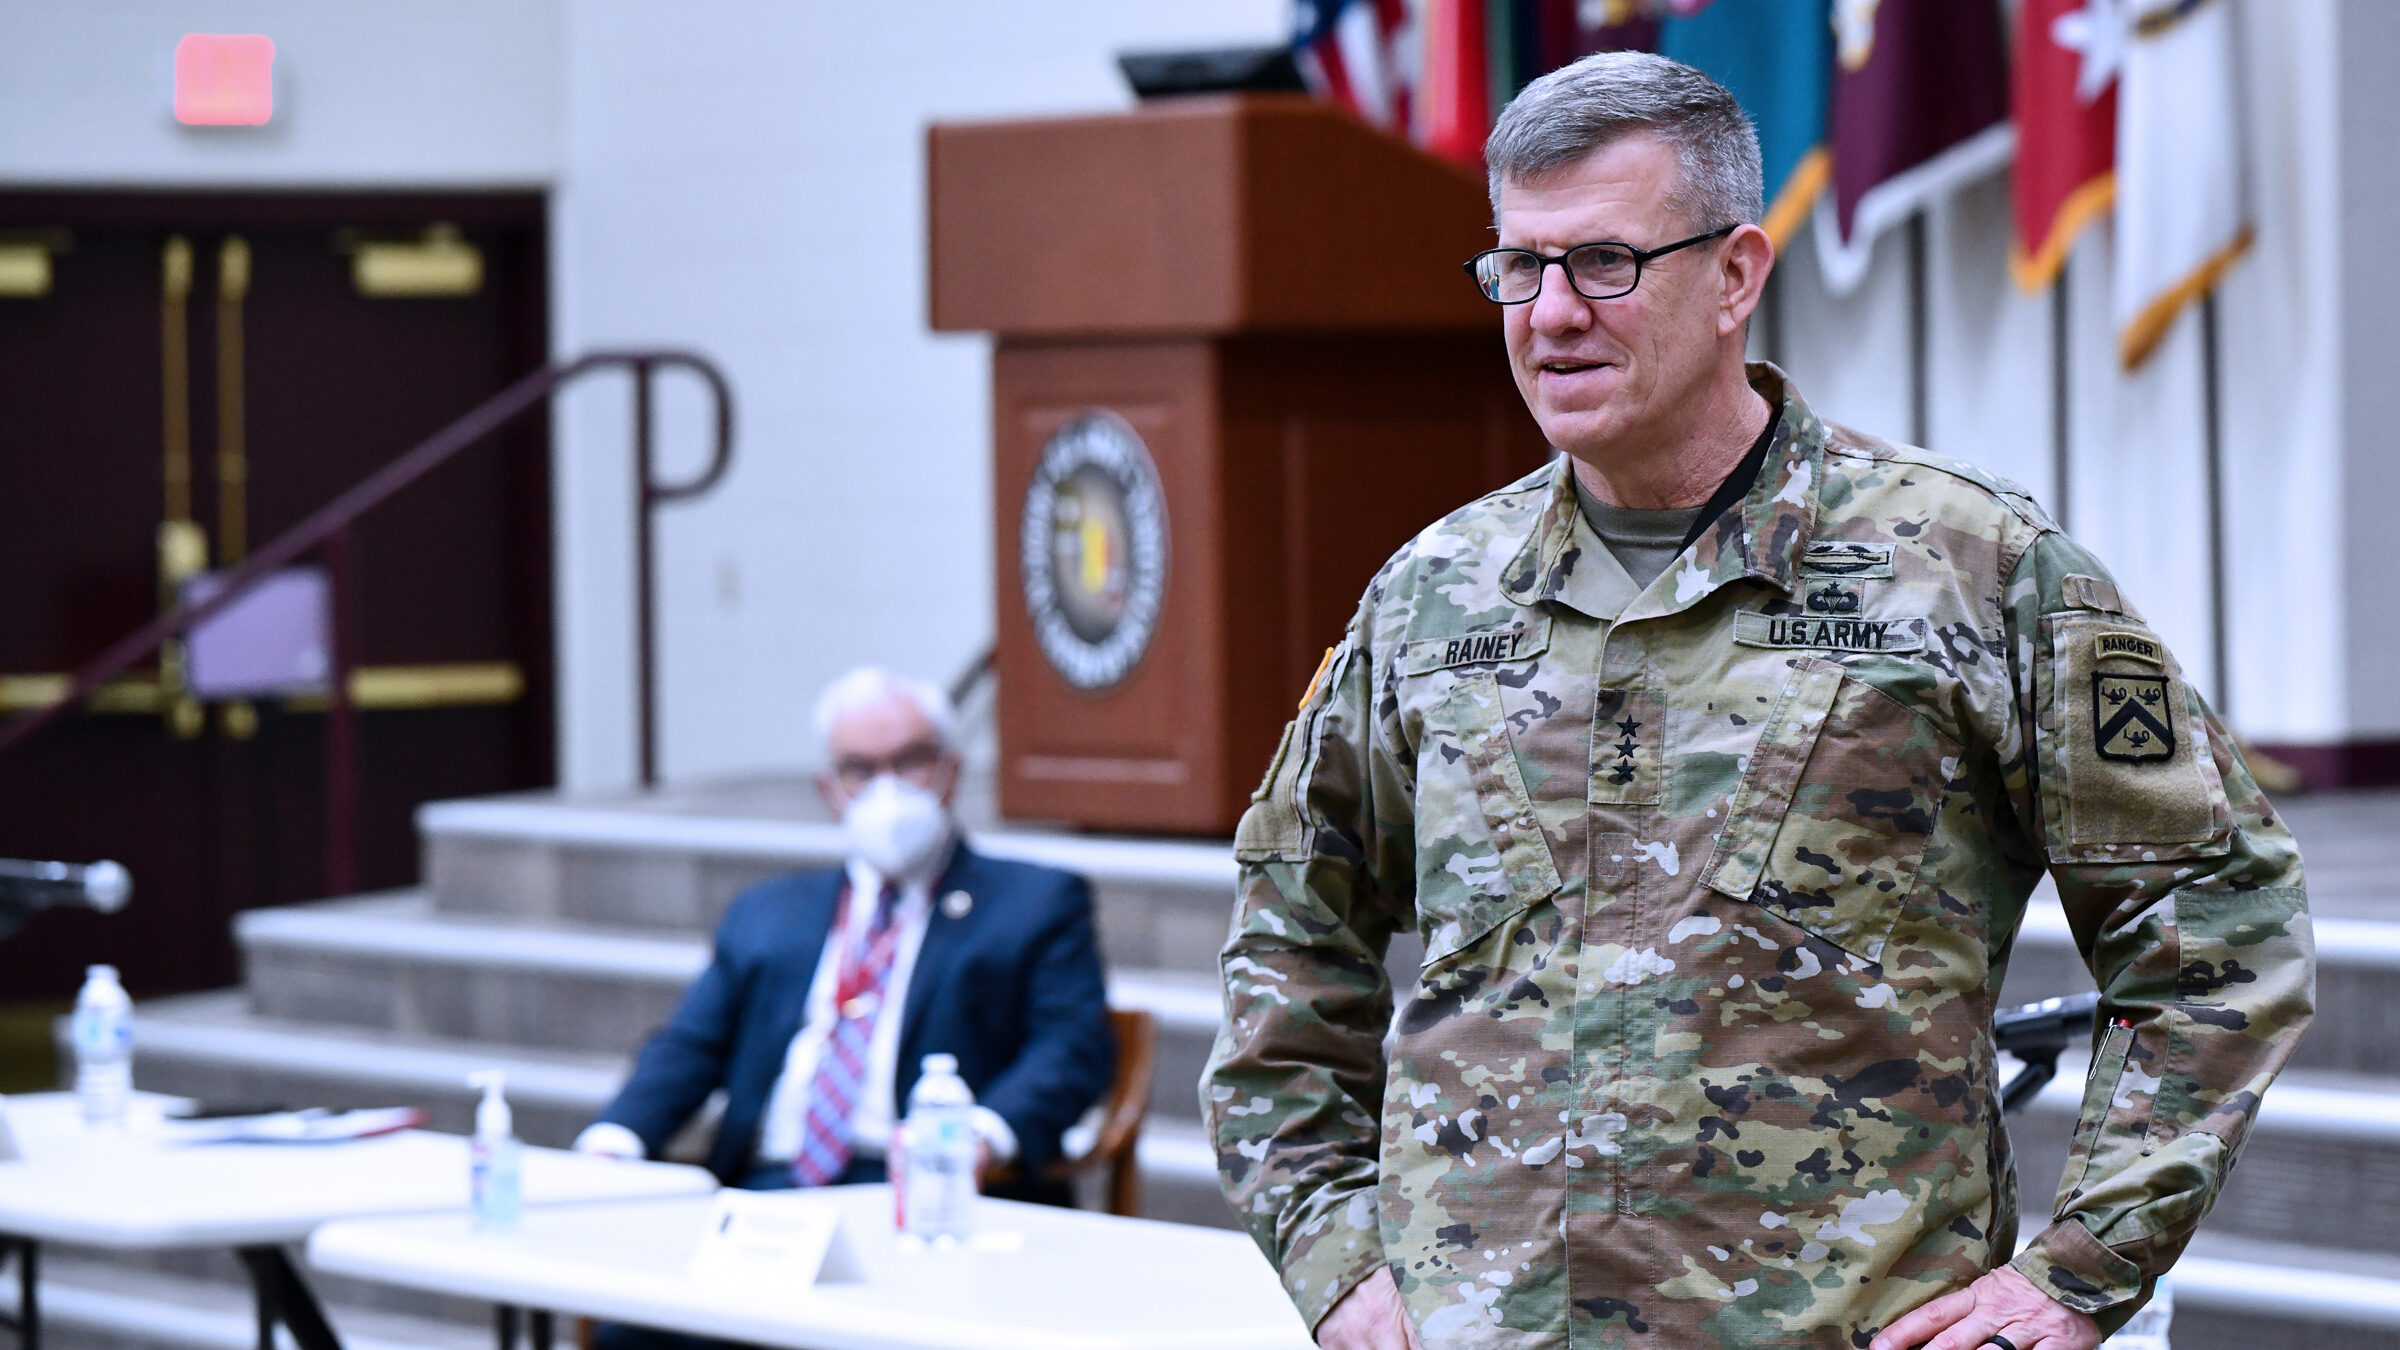 After months of delay, Army nominates new commander for Futures Command